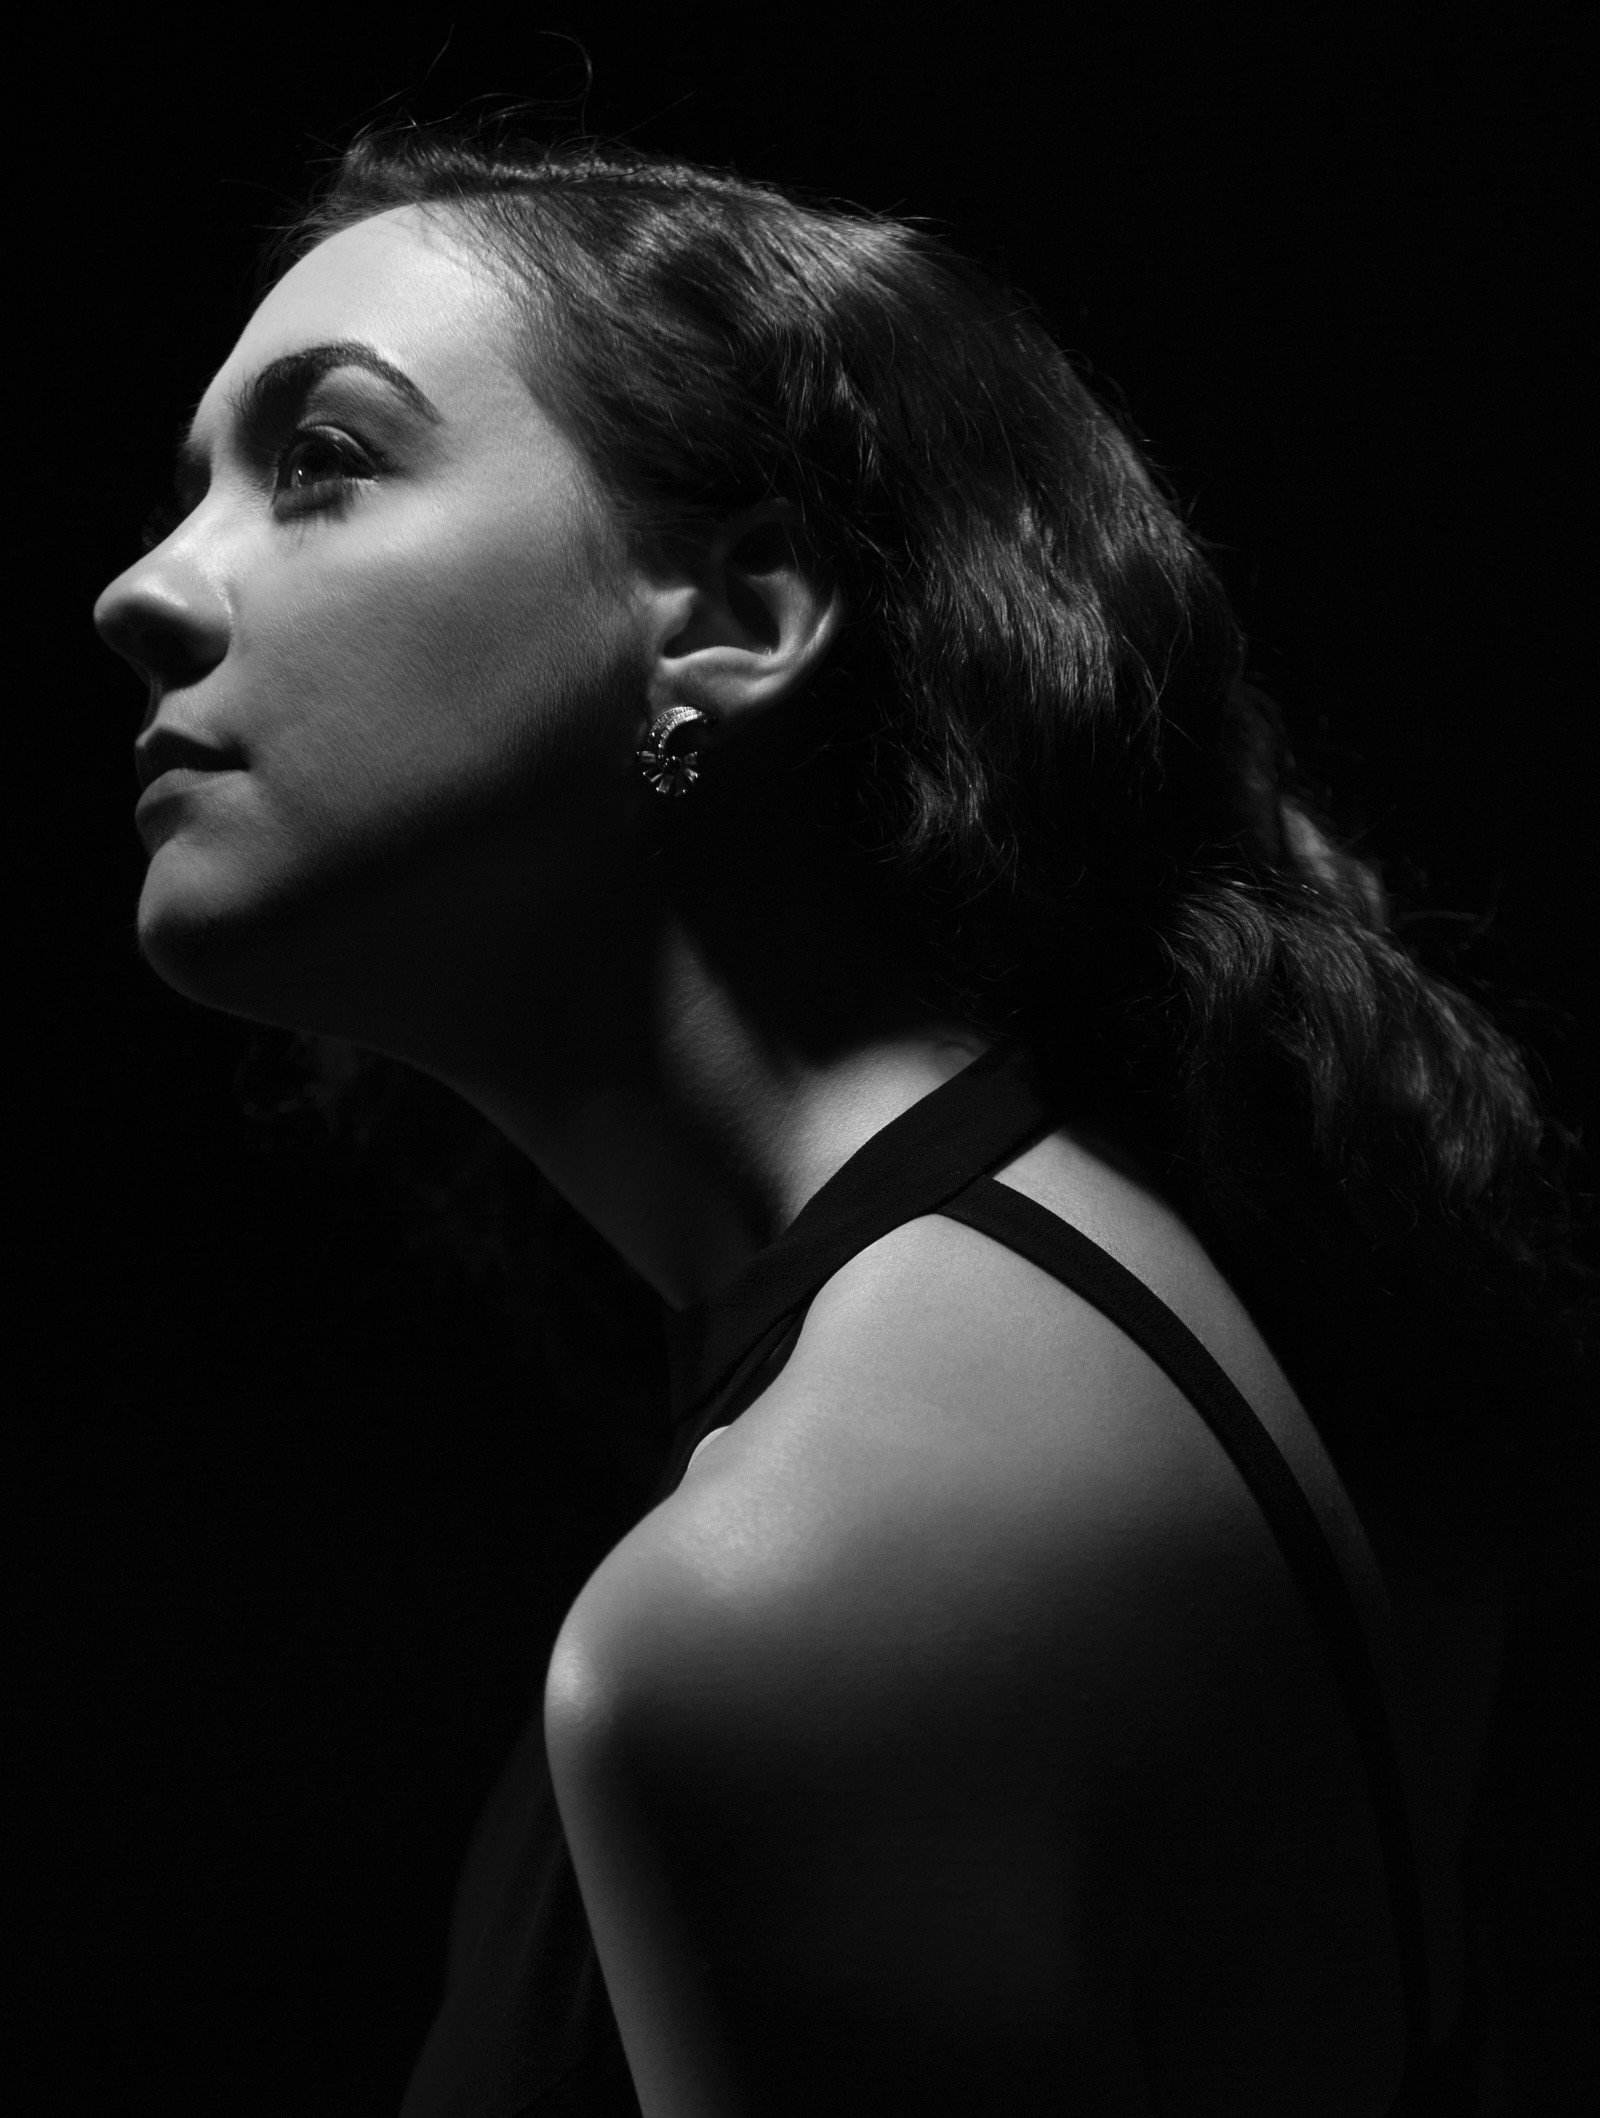 In this black and white portrait, Kathleen Granados is seen in profile, lit from above.